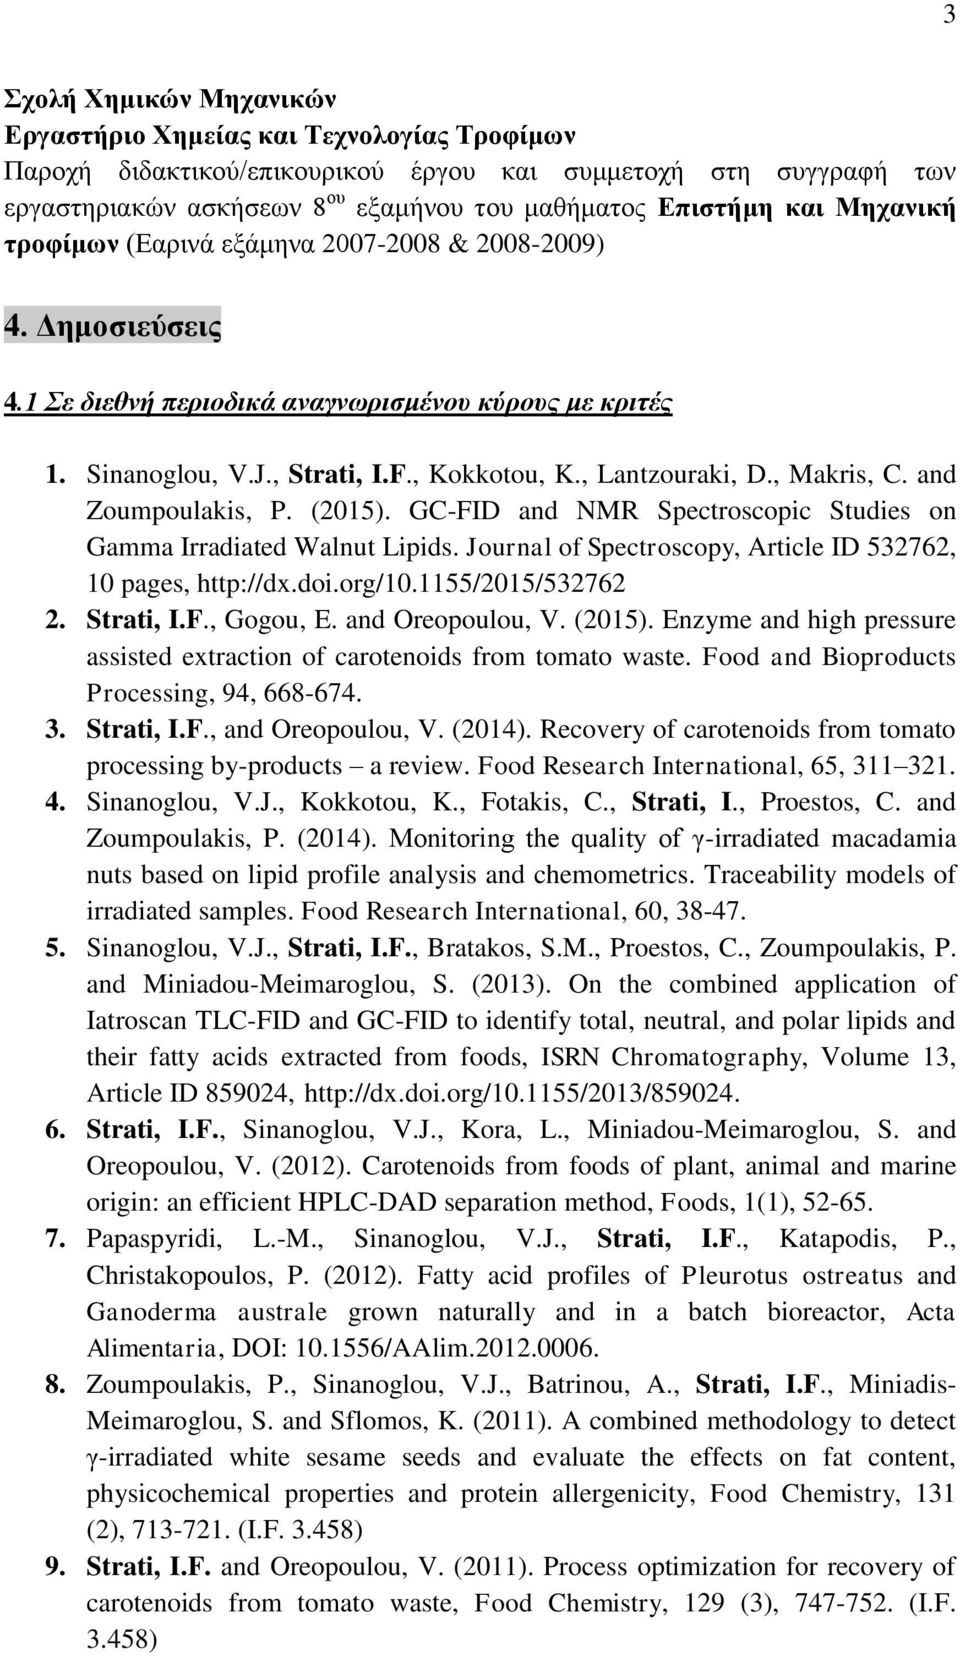 , Makris, C. and Zoumpoulakis, P. (2015). GC-FID and NMR Spectroscopic Studies on Gamma Irradiated Walnut Lipids. Journal of Spectroscopy, Article ID 532762, 10 pages, http://dx.doi.org/10.